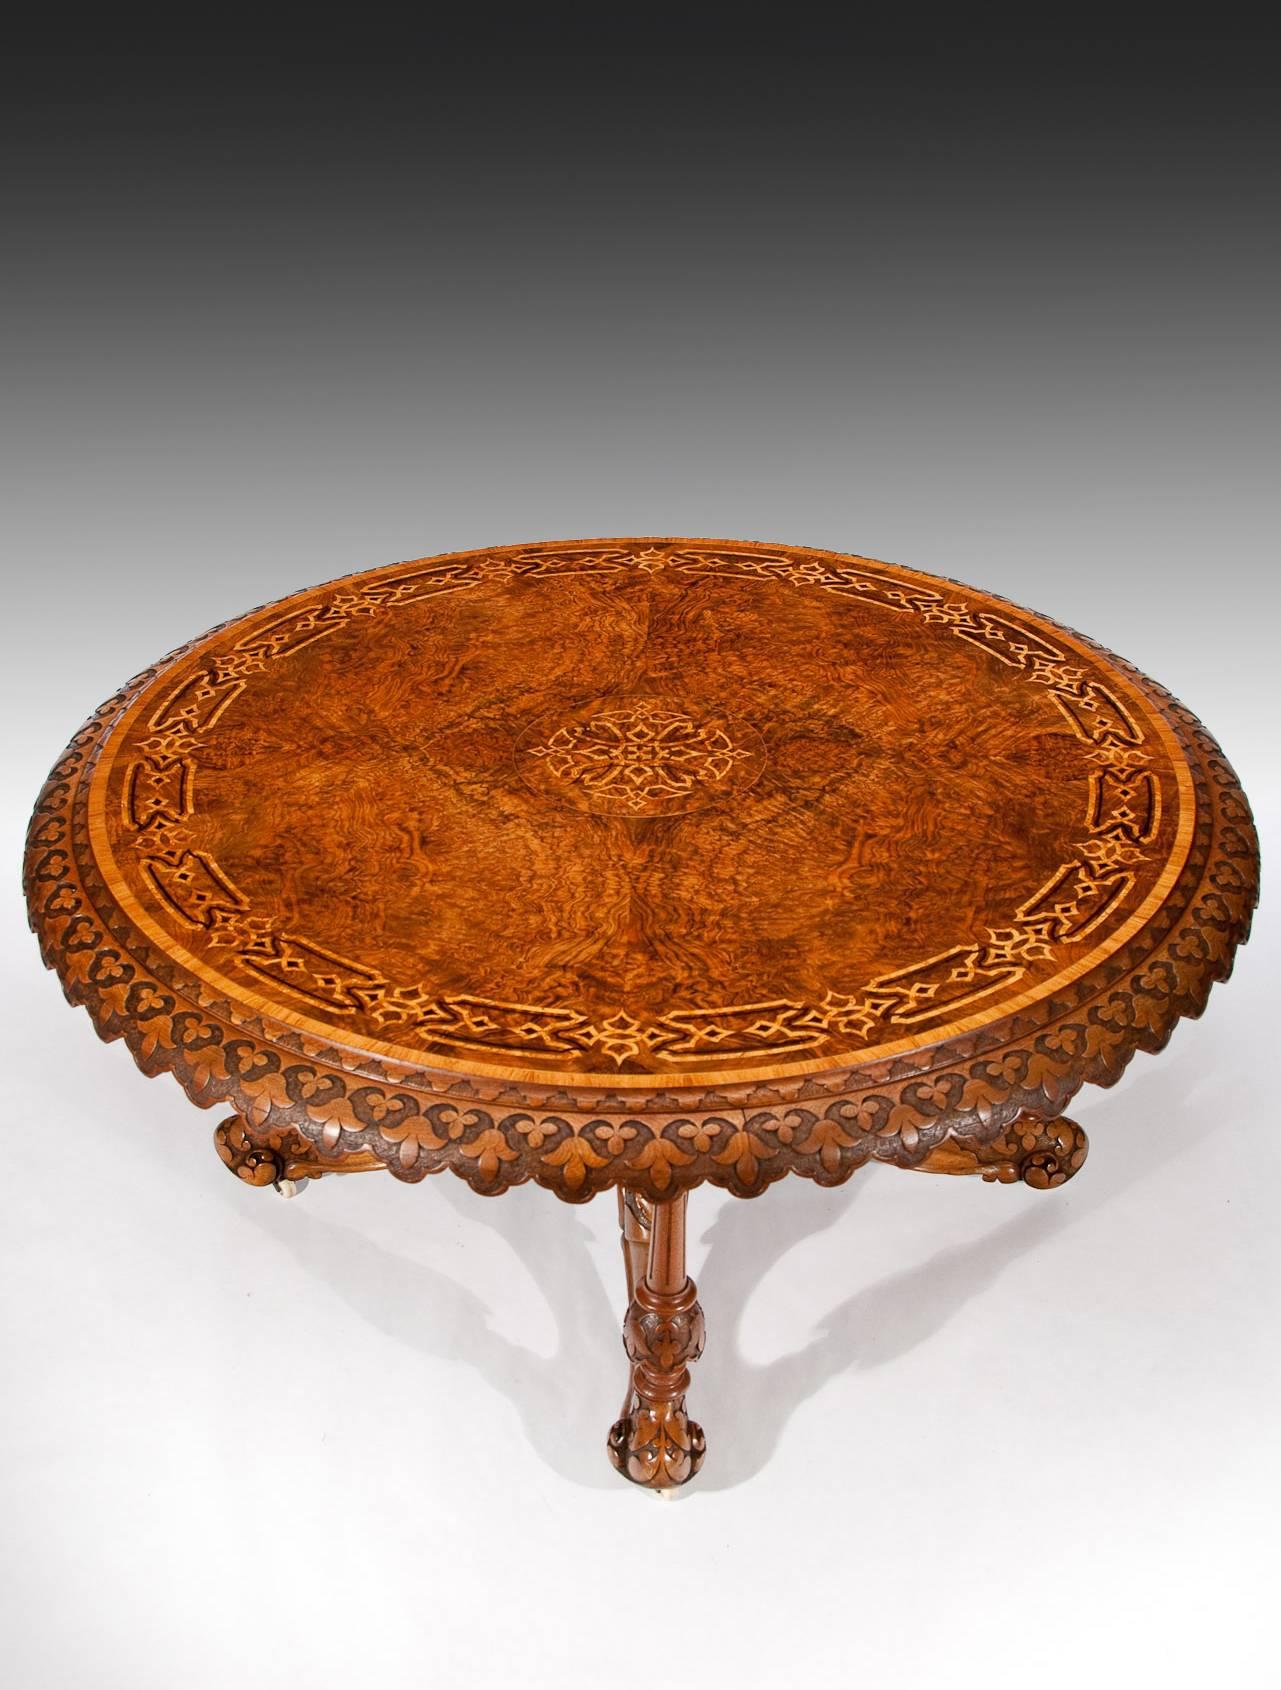 Victorian period burr walnut and bird's-eye maple marquetry antique centre table, circa 1860. 
The large circular top finely veneered in a beautifully figured burr walnut with bird's-eye maple and a purple heart marquetry central panel having a